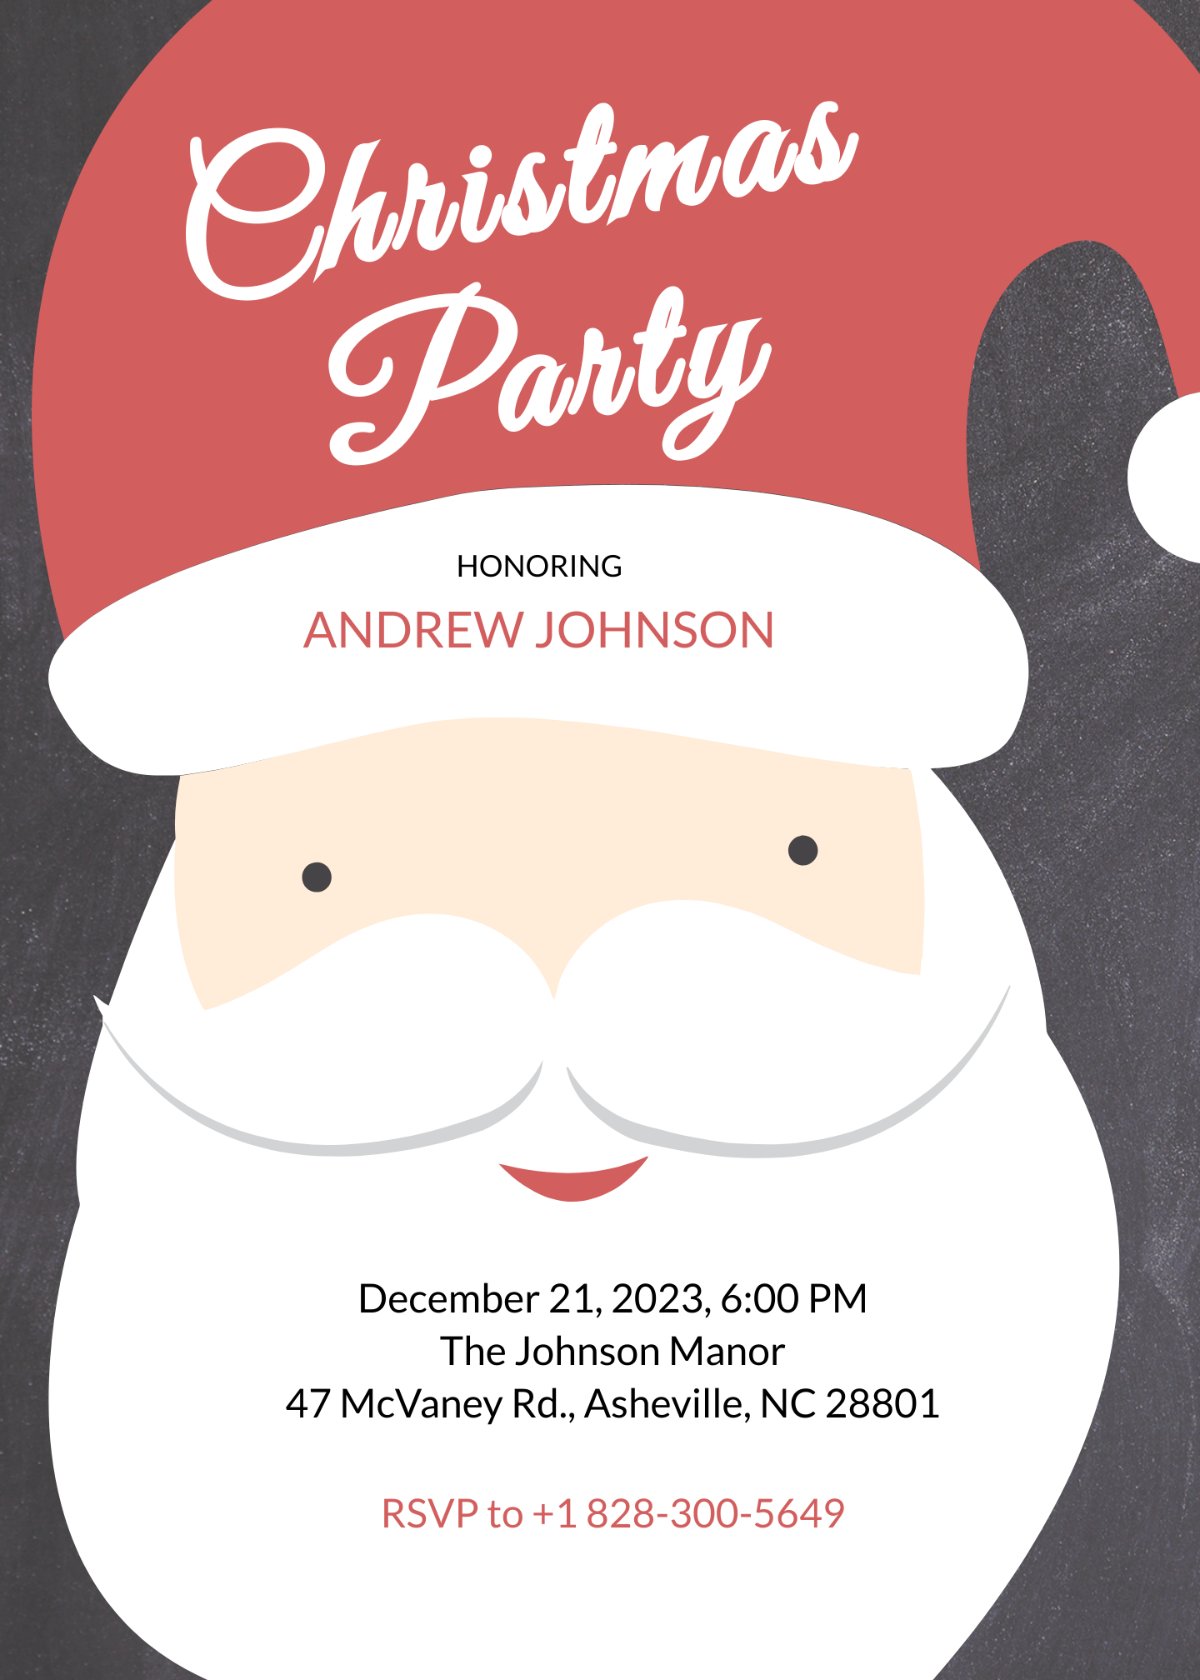 FREE Christmas Party Invitation - Edit Online & Download | Template.net